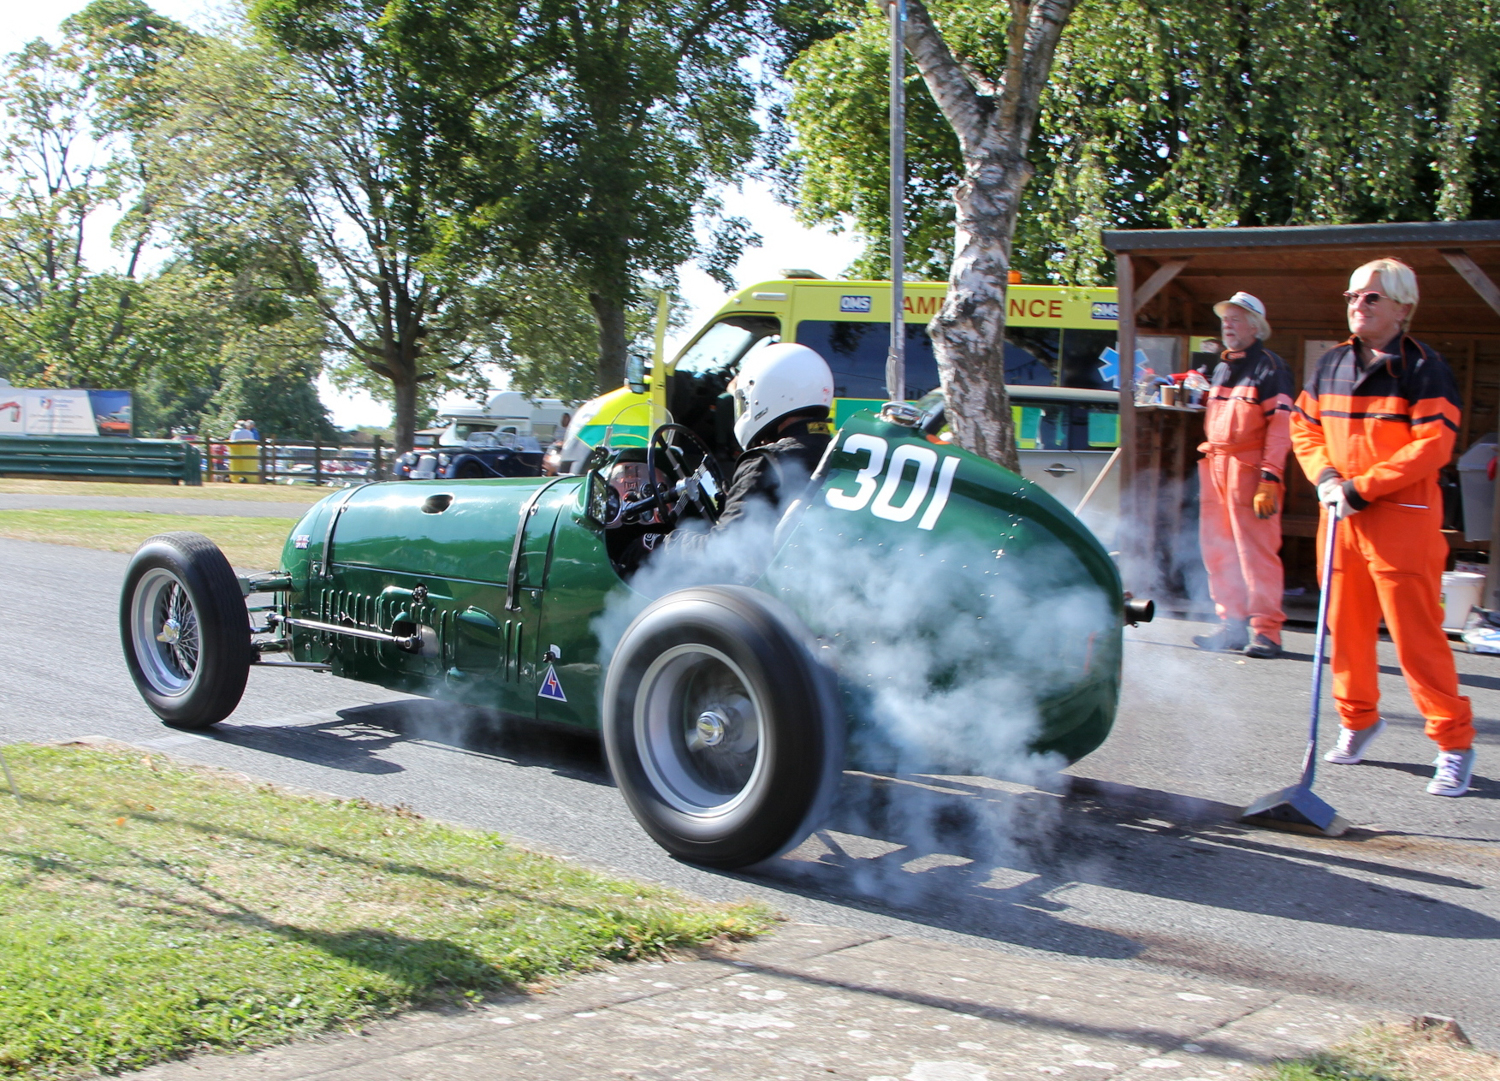 FASTEST TIME OF THE DAY WENT TO IAN BAXTER'S 1937 ALTA 61 IS. Picasa